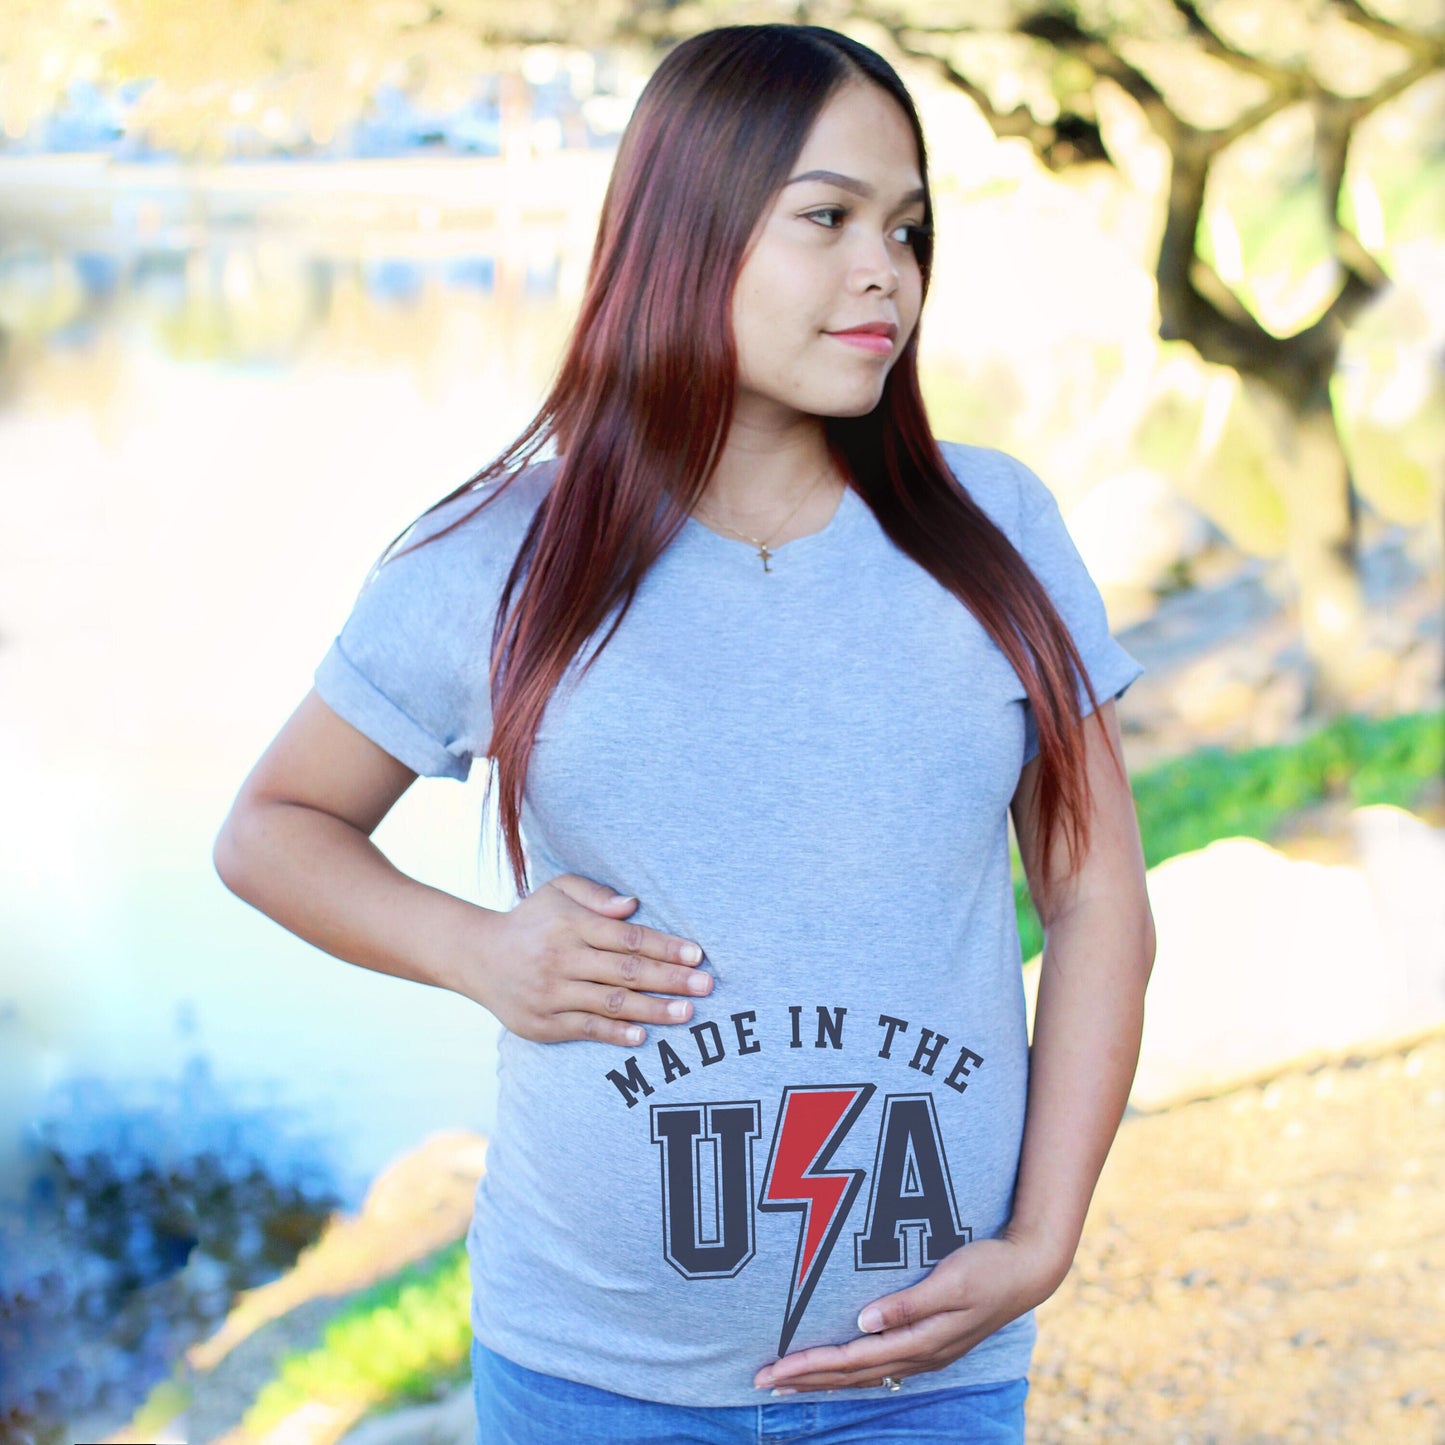 Made in the USA Pregnancy t-shirt - pregnancy announcement shirt - 4th of july pregnancy t-shirt